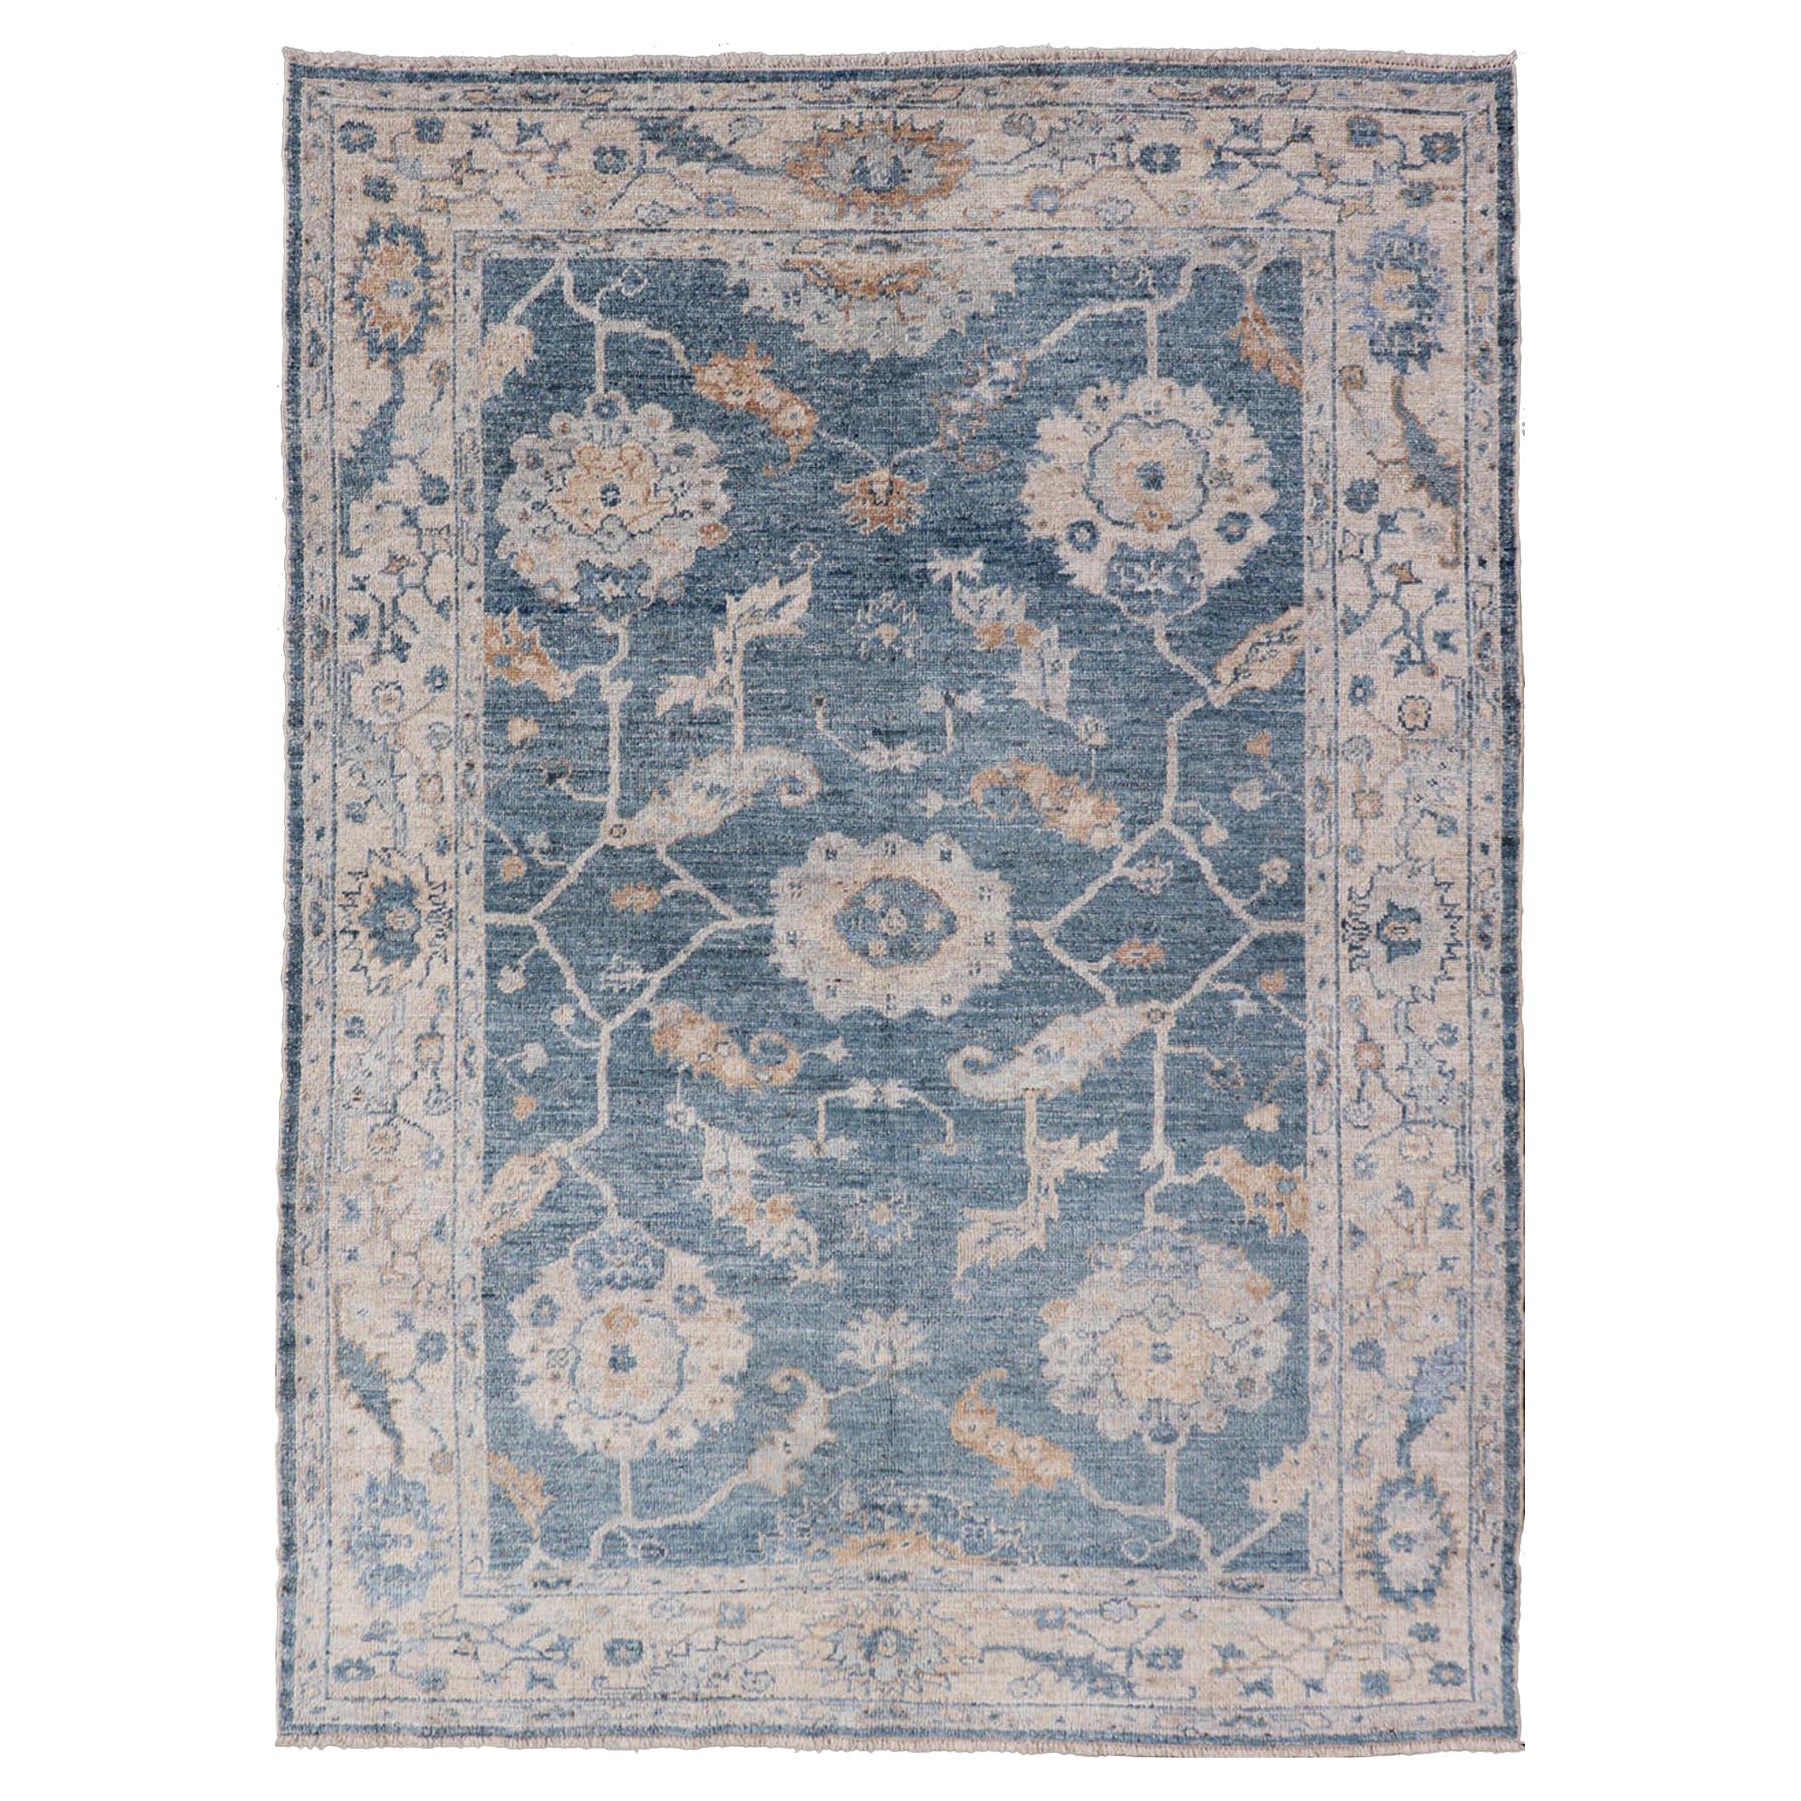 Angora Turkish Oushak Floral Design in Blue, Creams and Mocha Colors